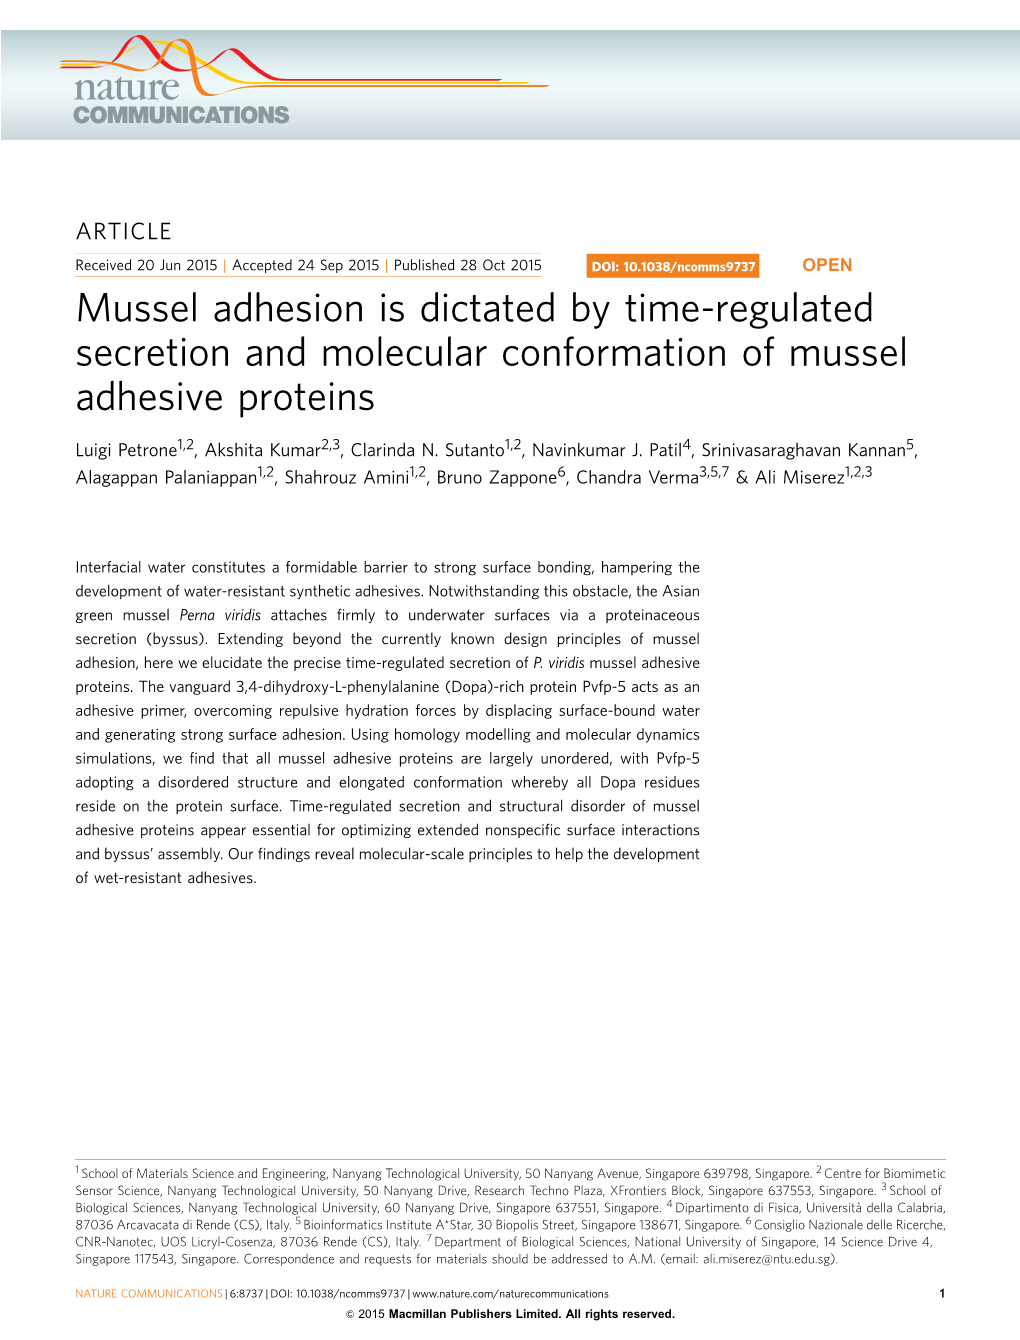 Mussel Adhesion Is Dictated by Time-Regulated Secretion and Molecular Conformation of Mussel Adhesive Proteins